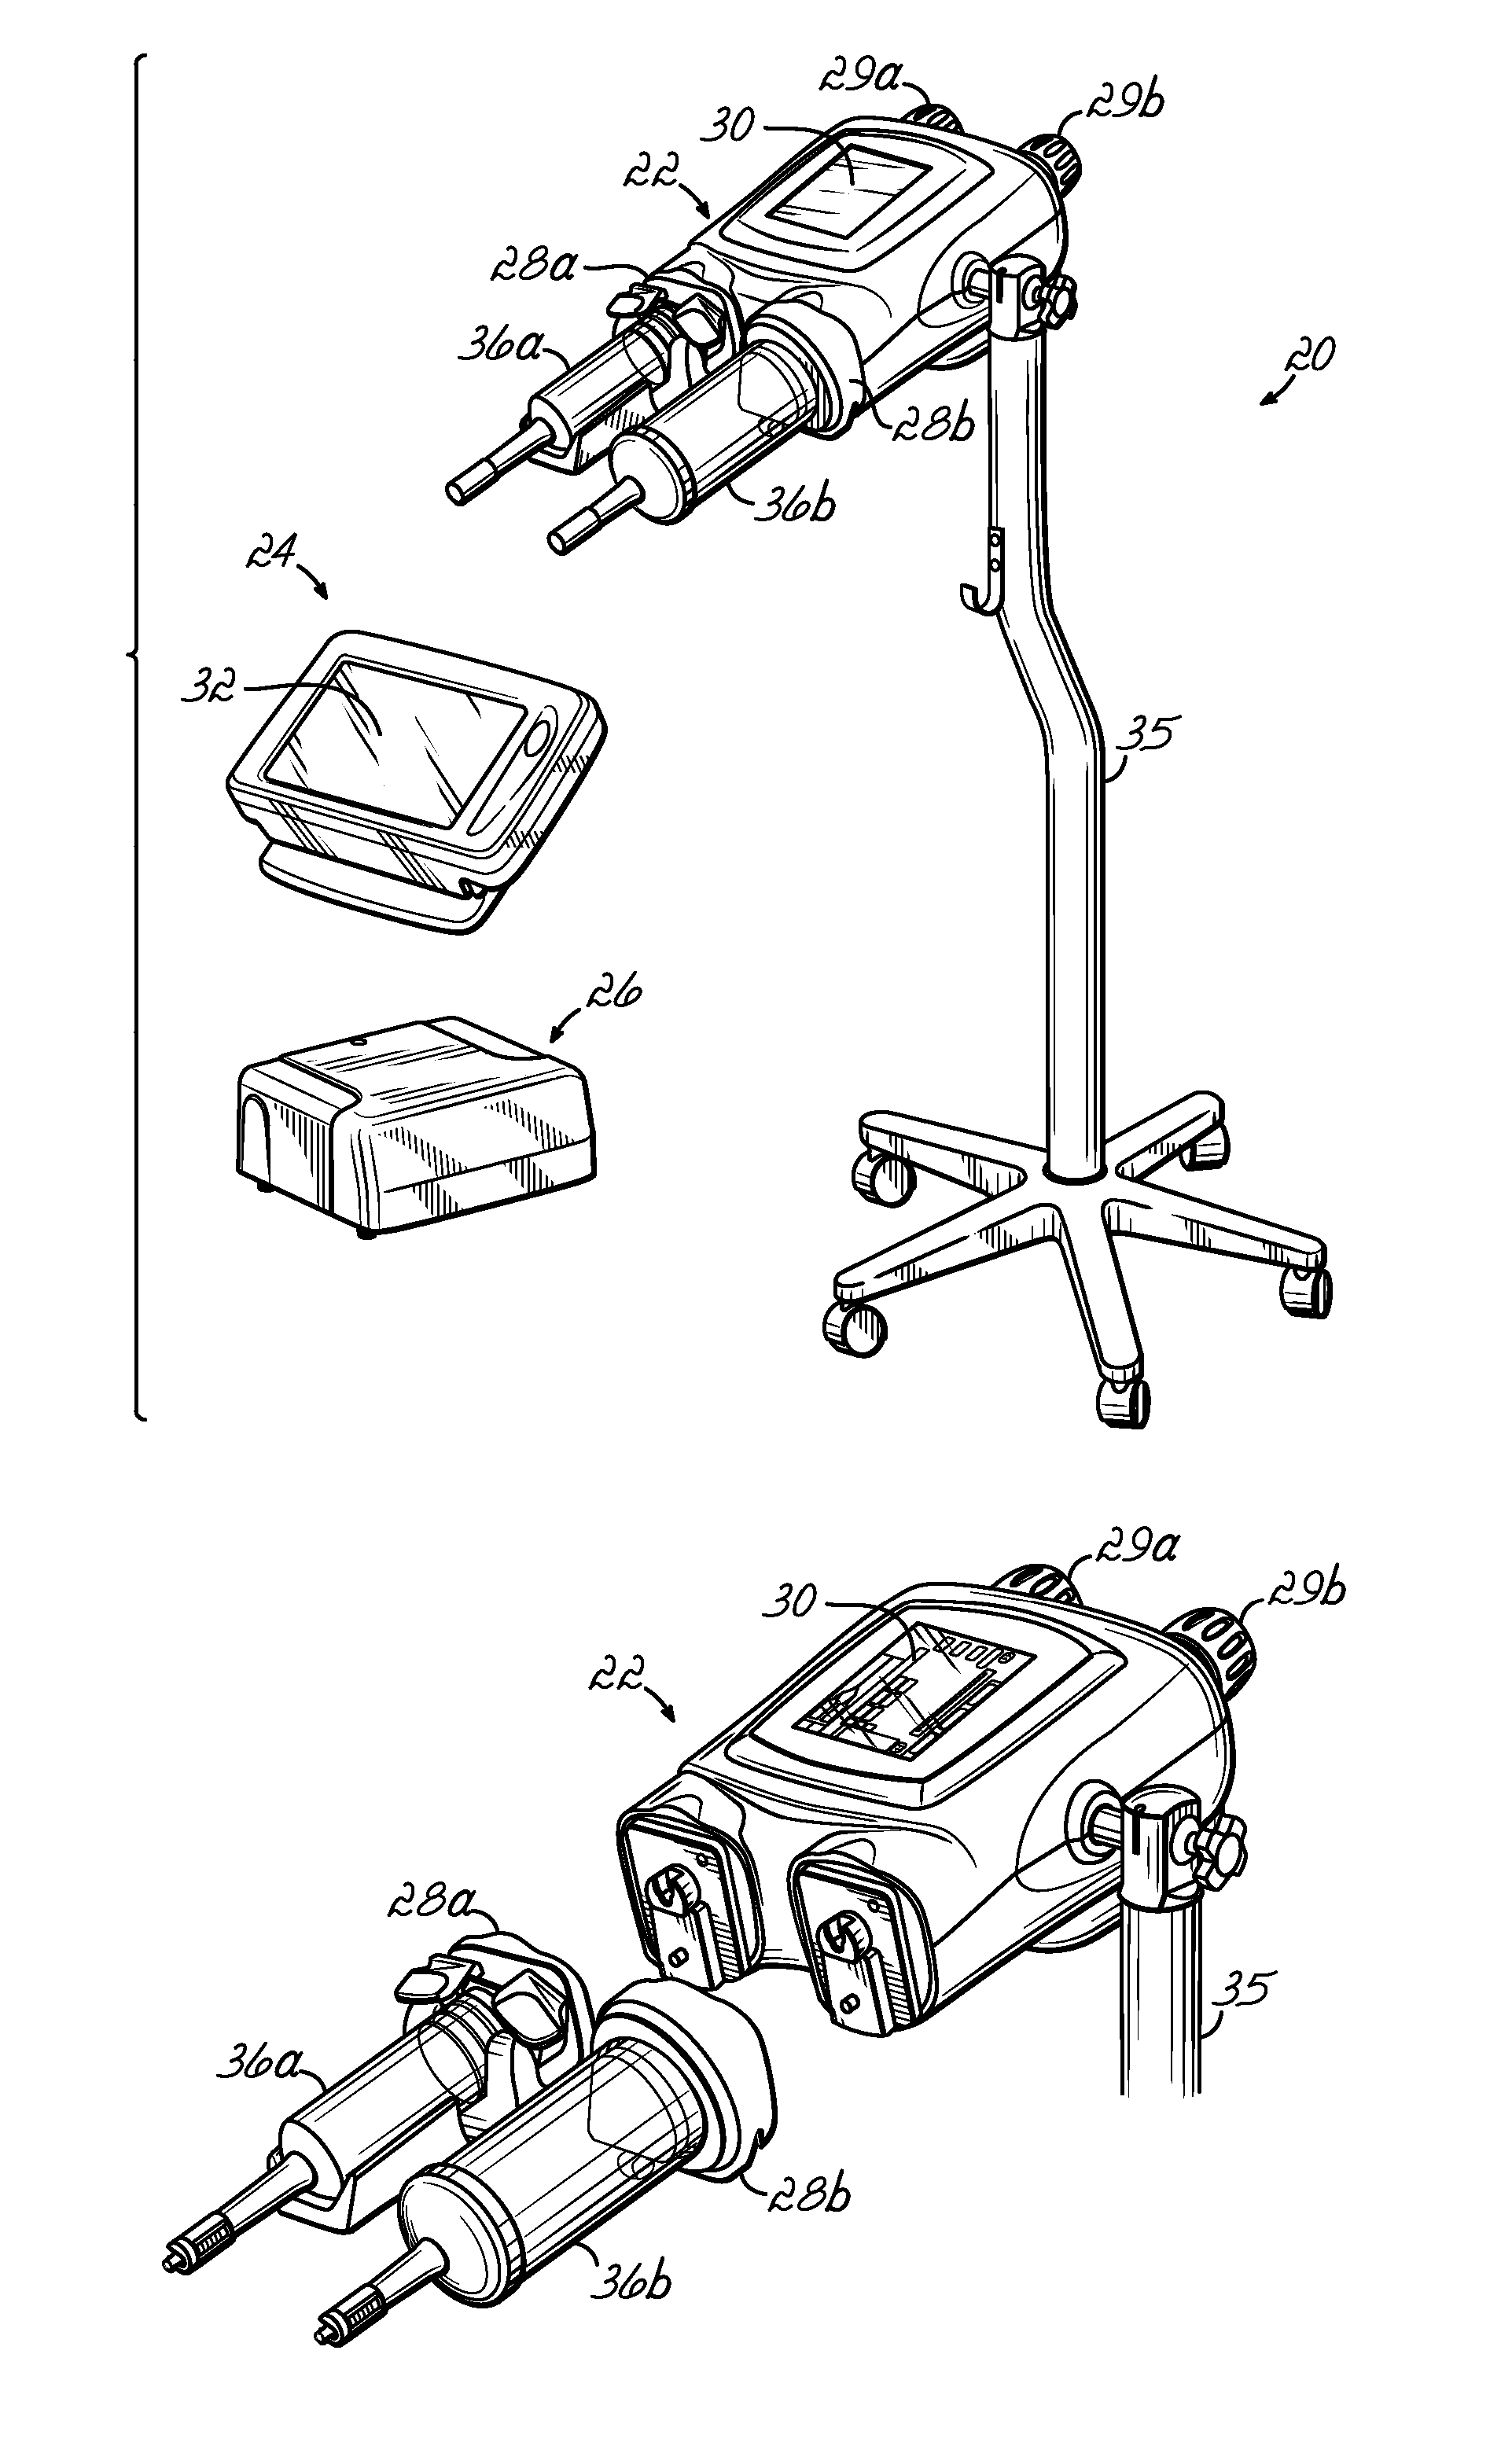 Powerhead Control in a Power Injection System